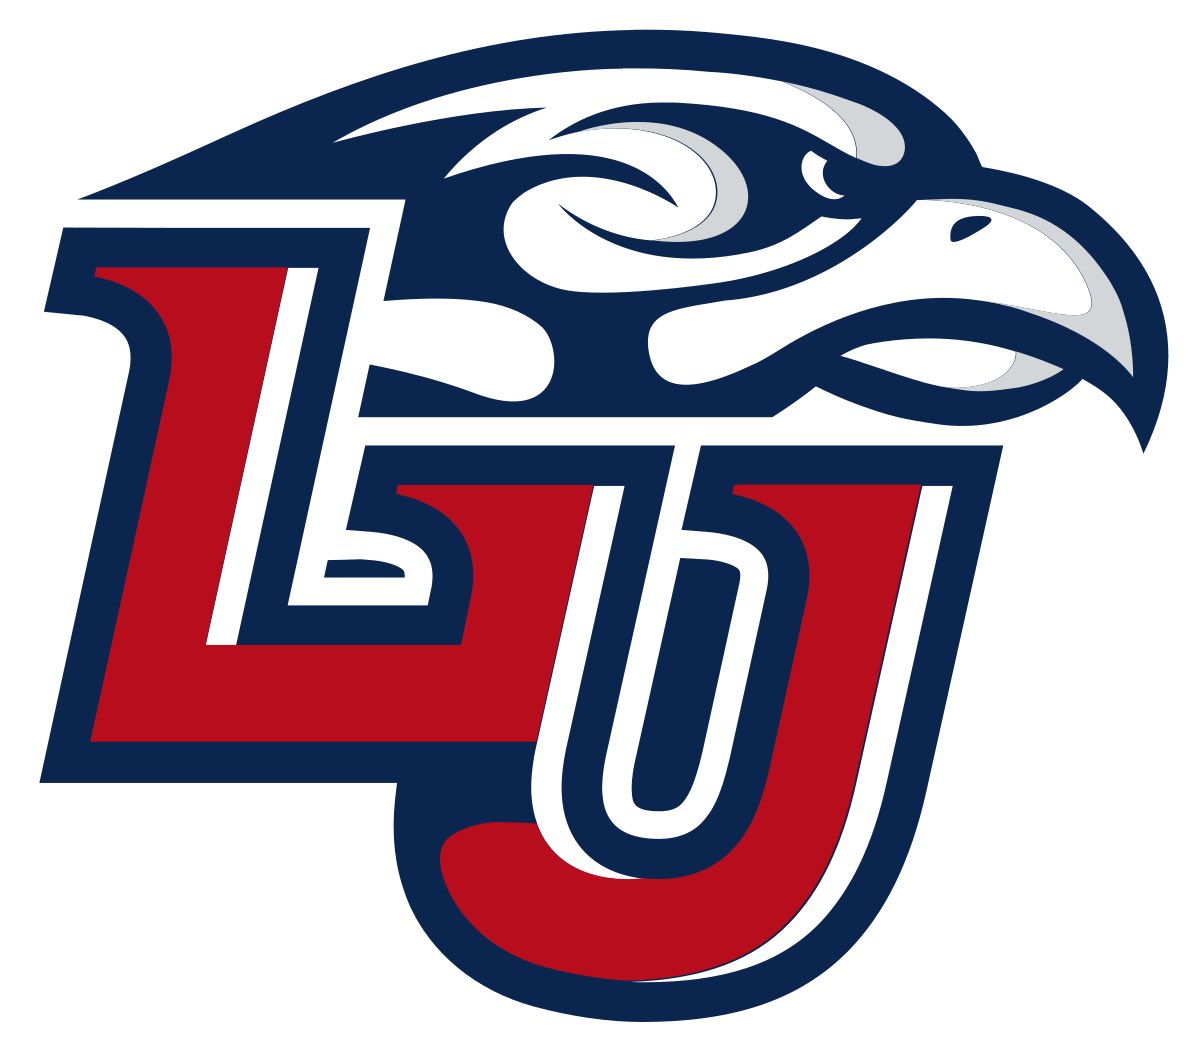 #AGTG After a great phone call with @Tony_TDUB I am blessed to receive an offer by liberty university!! @powhatanhsath @dhglover @RivalsFriedman @MohrRecruiting @CoachChadwell